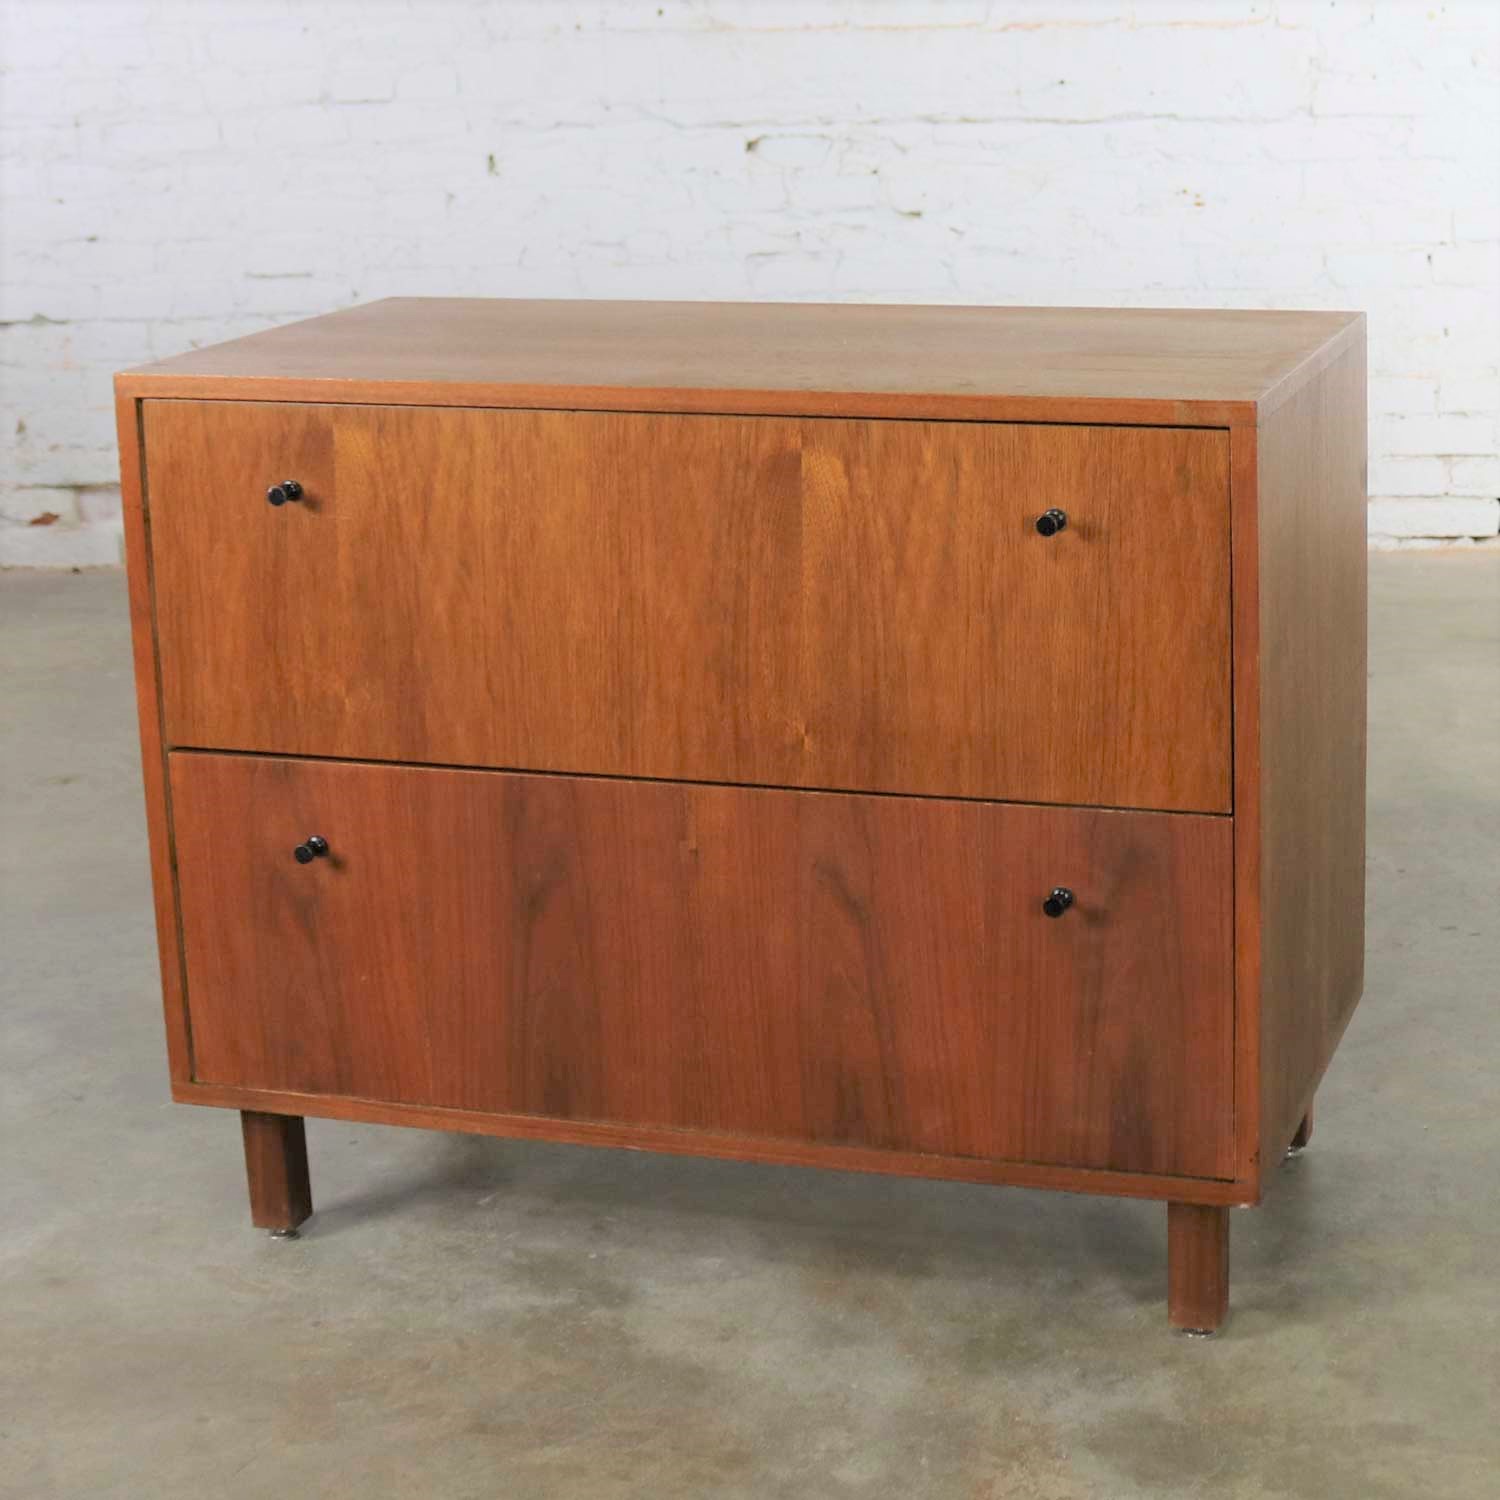 Walnut Finish Durable Strong Wood Material Belham Living Carter Mid-Century Modern Two-Drawer File Cabinet